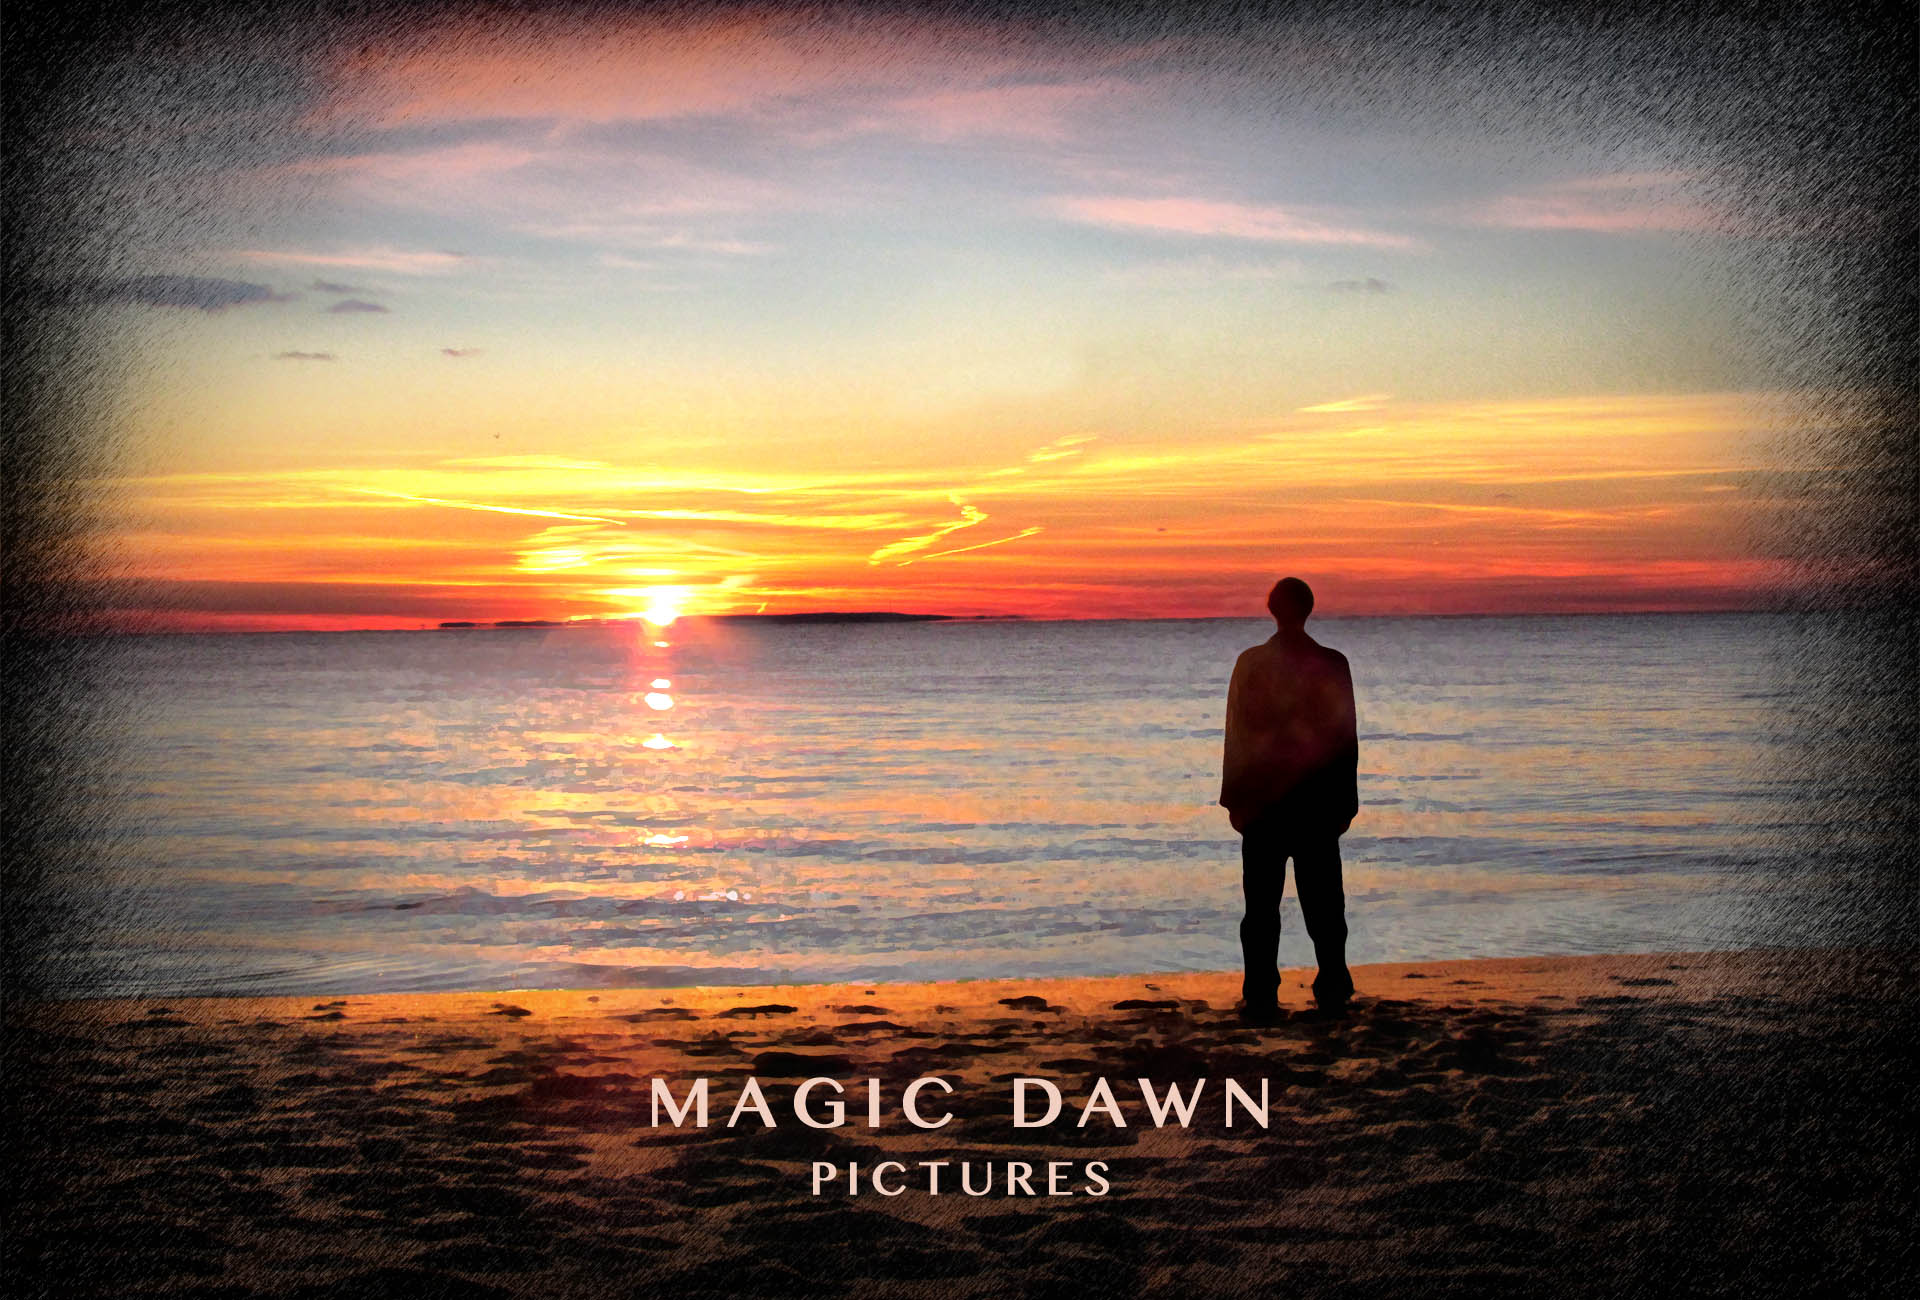 Magic Dawn Pictures - an independent film production and distribution company